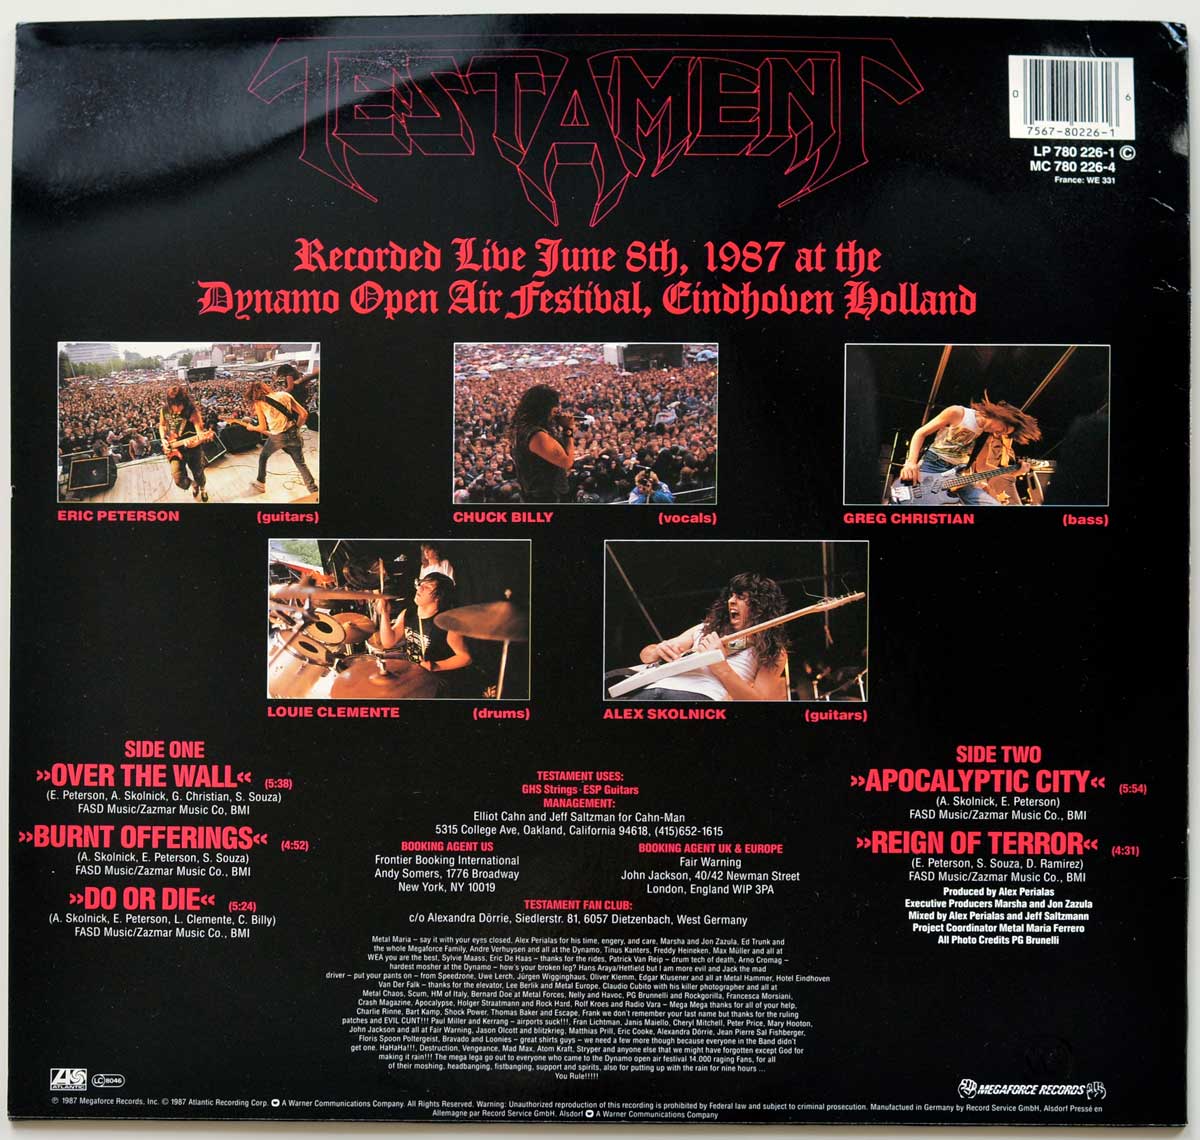 Album Back Cover  Photo of "TESTAMENT Live at Eindhoven"